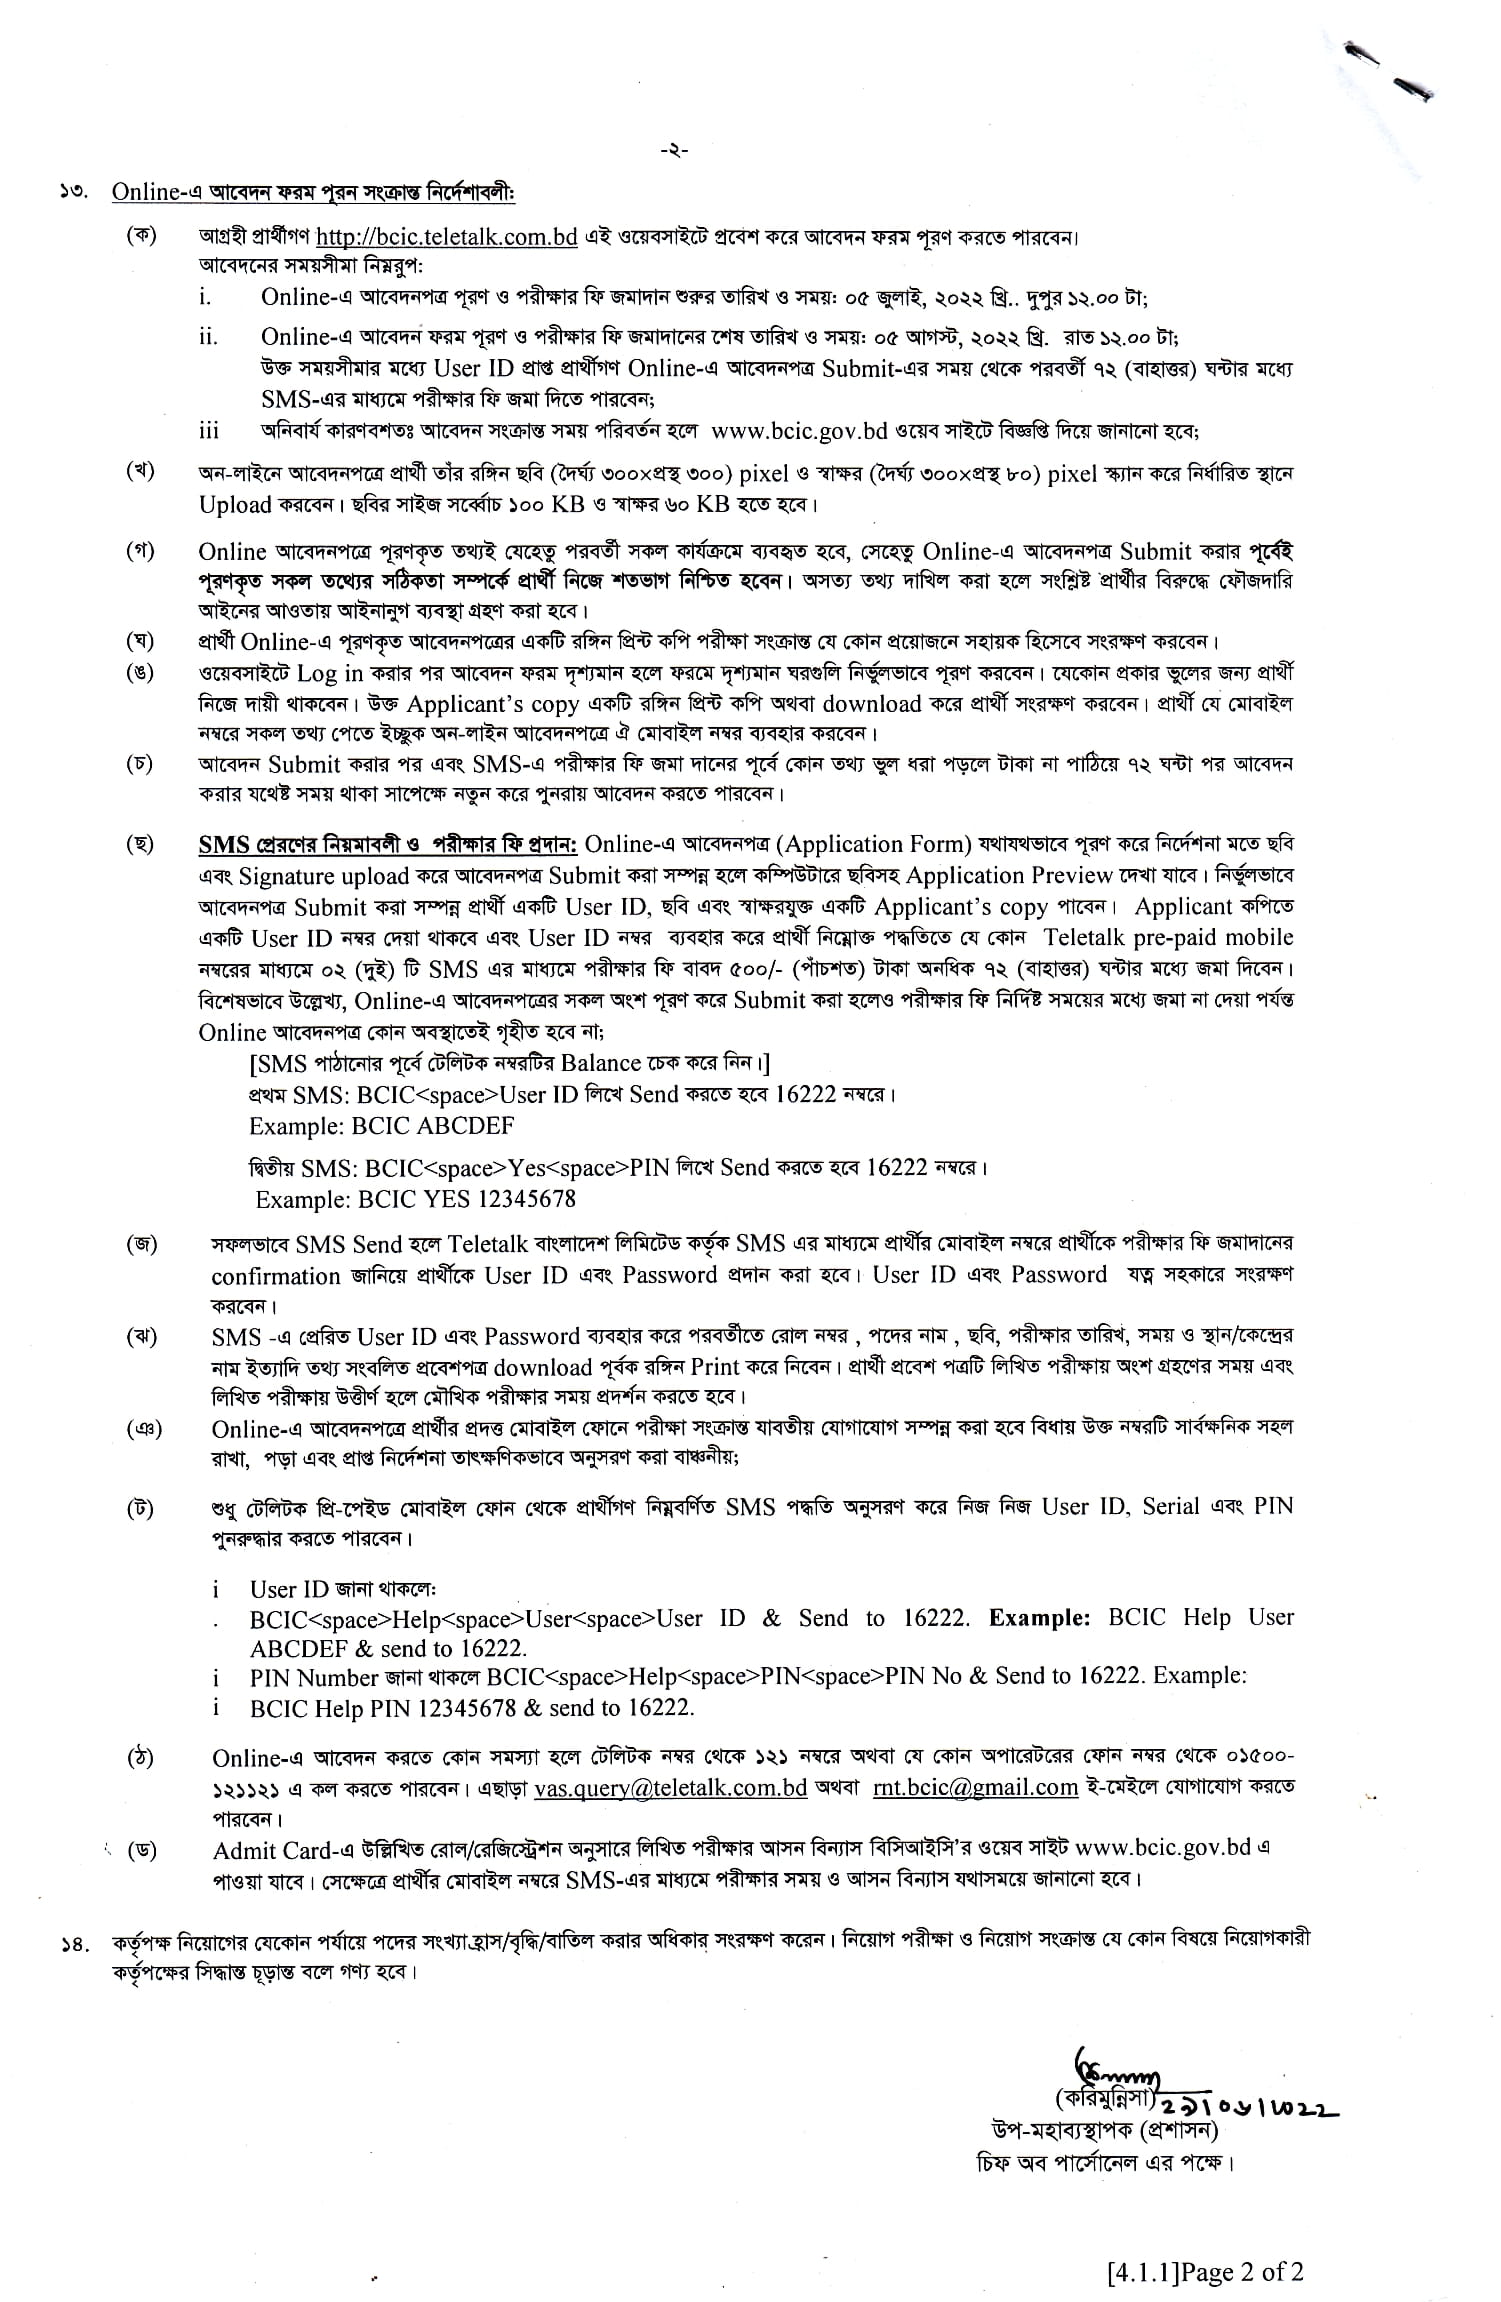 2nd page of BCIC circular